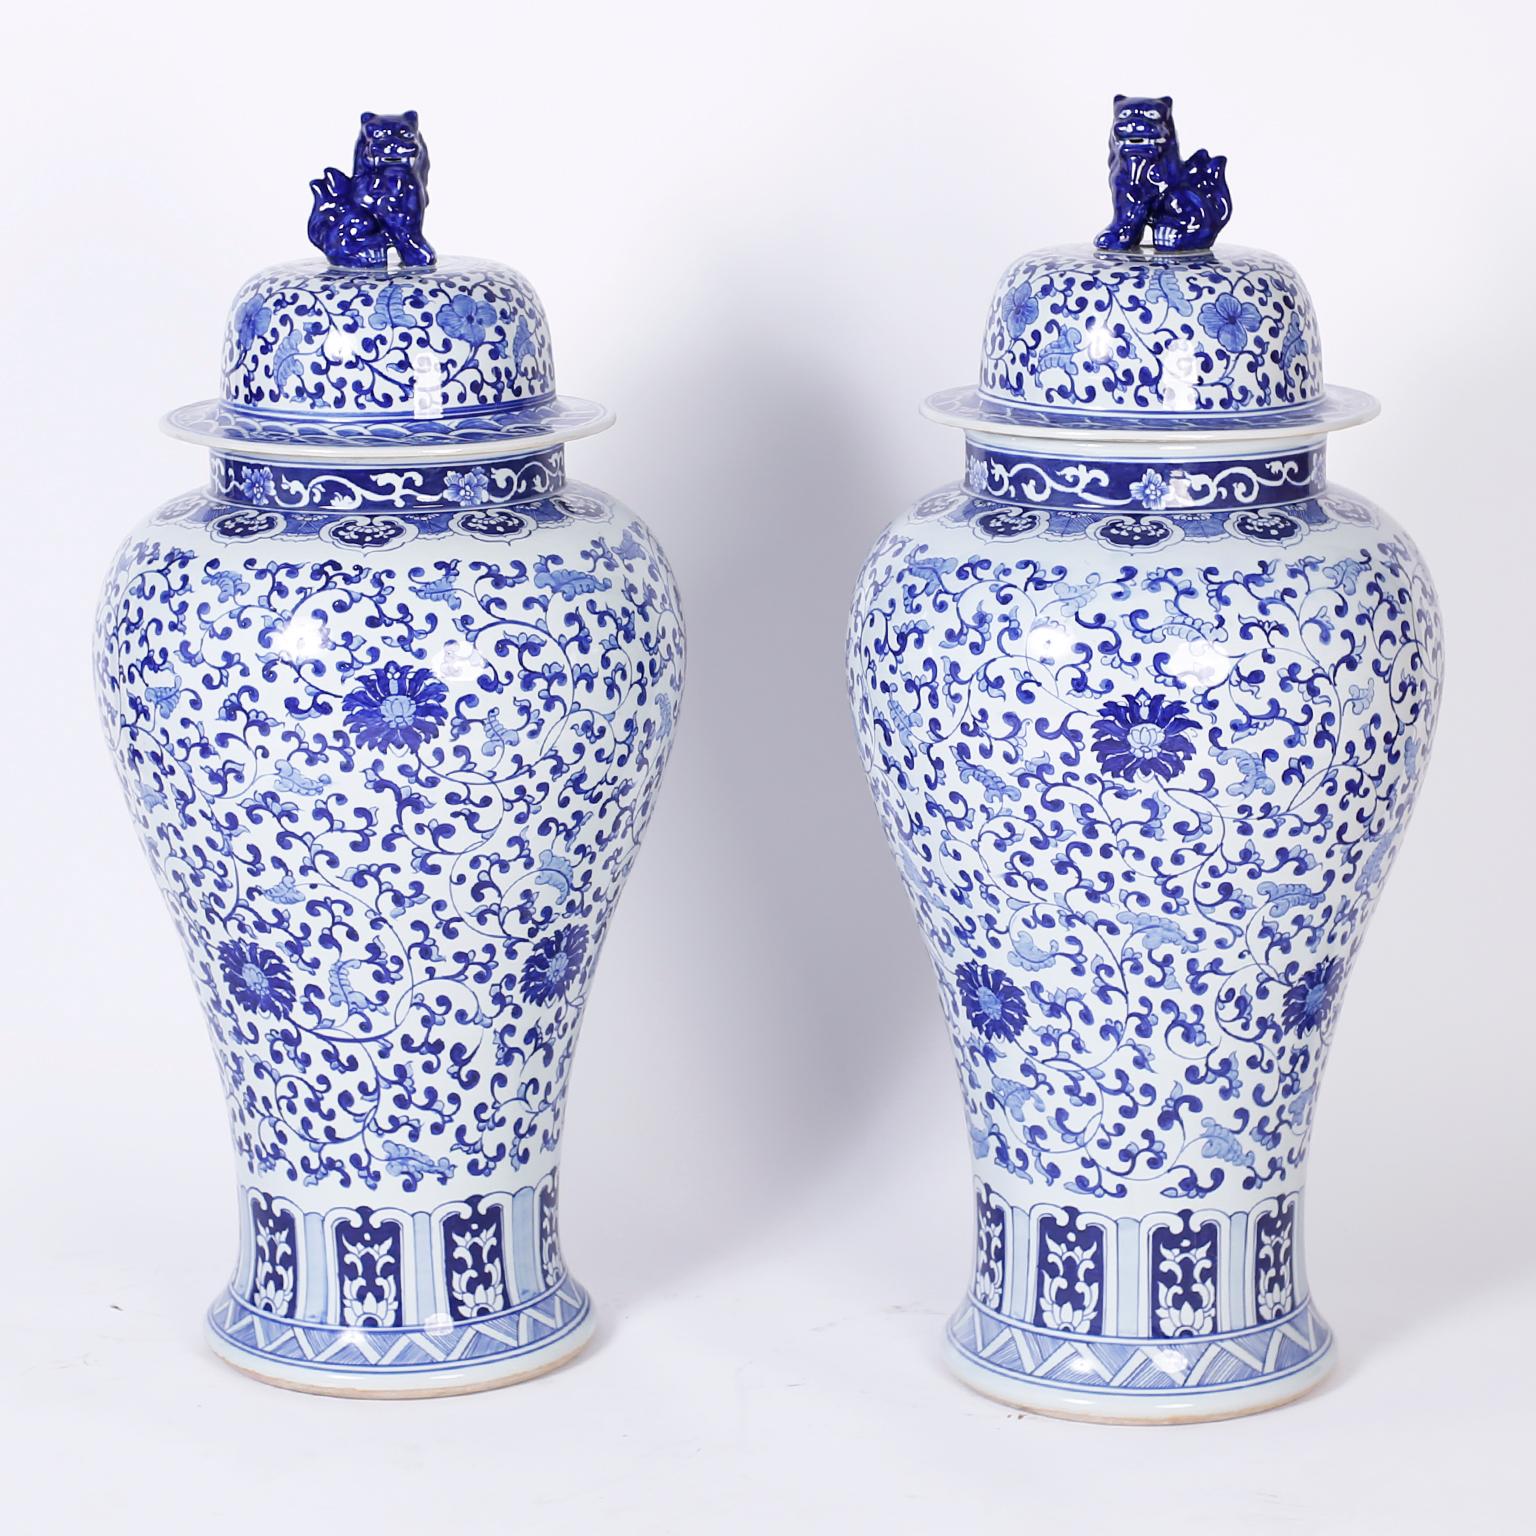 Impressive pair of Chinese blue and white urns hand decorated in delicate floral vine and leaf designs punctuated by flowers and featuring cobalt blue foo dog lid handles.